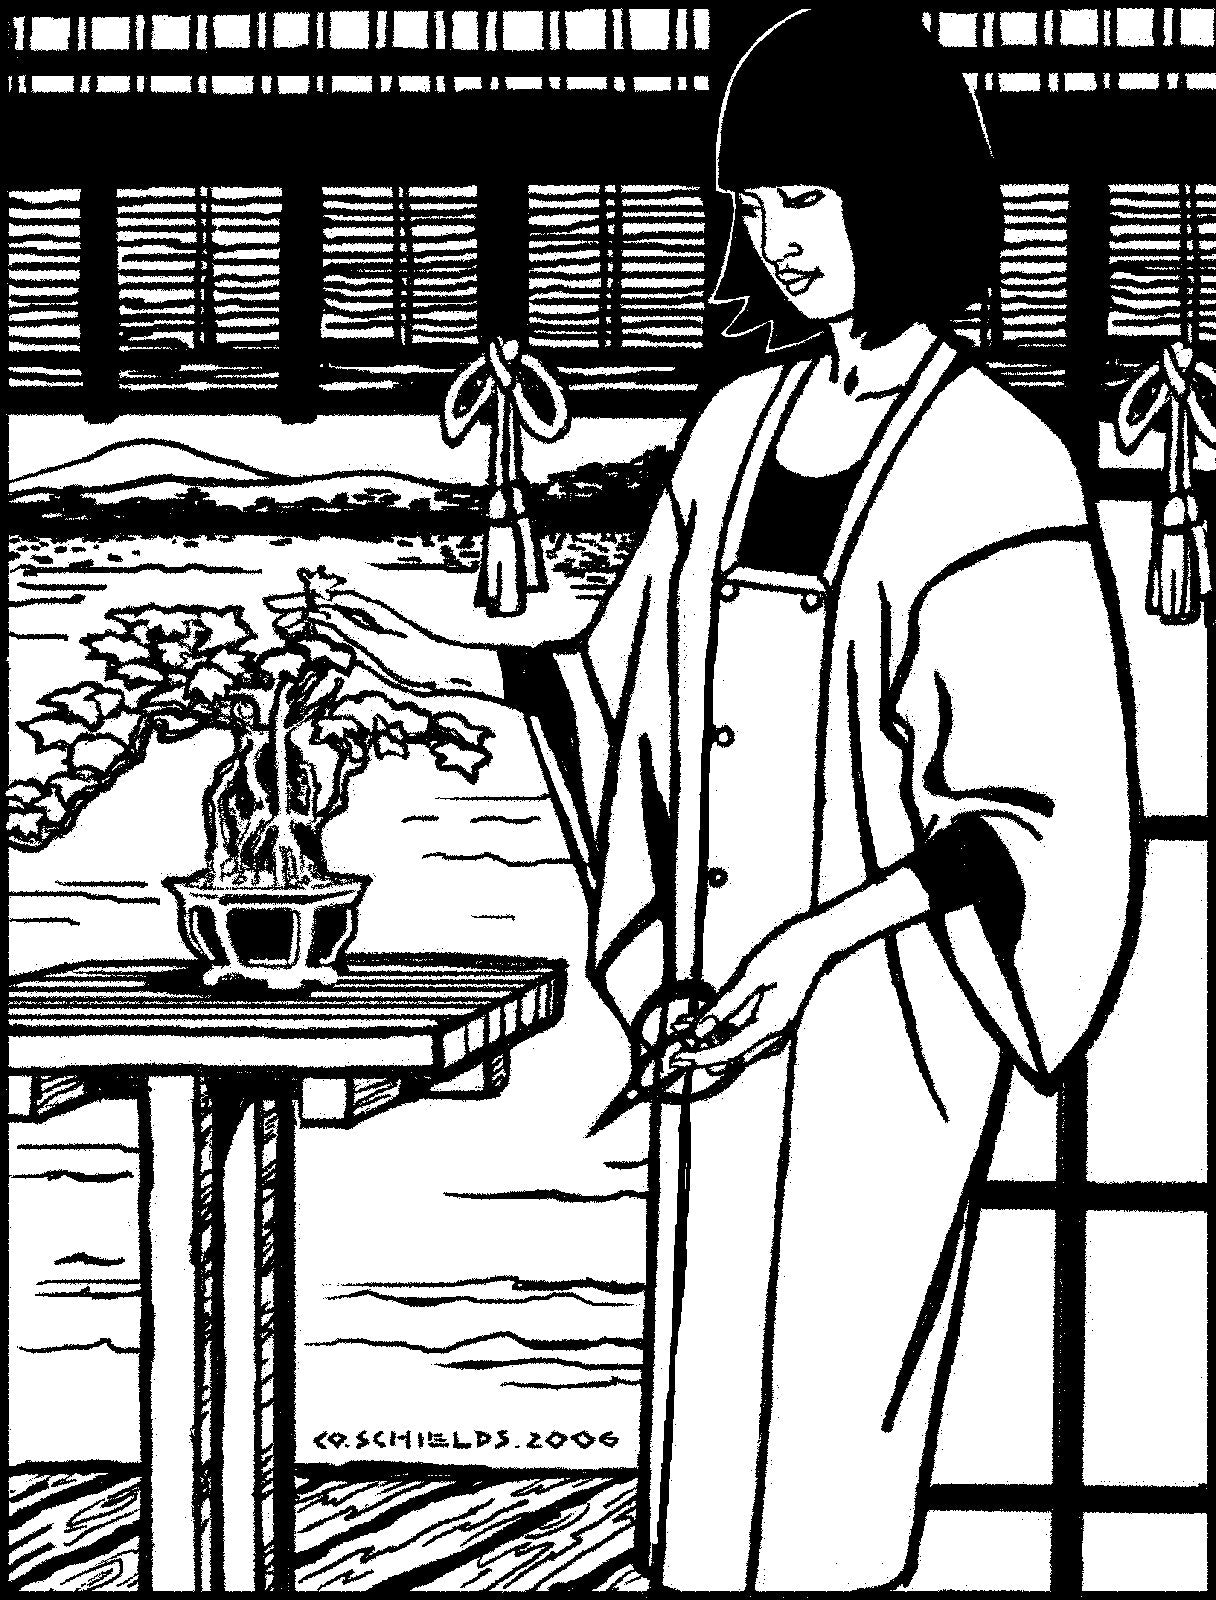 Black and white pen and ink drawing by artist Gretchen Shields.  Woman wearing Japanese Michiyuki tending to a bonsai tree.  Woman holds scissors in one hand and is touching tree with the other.